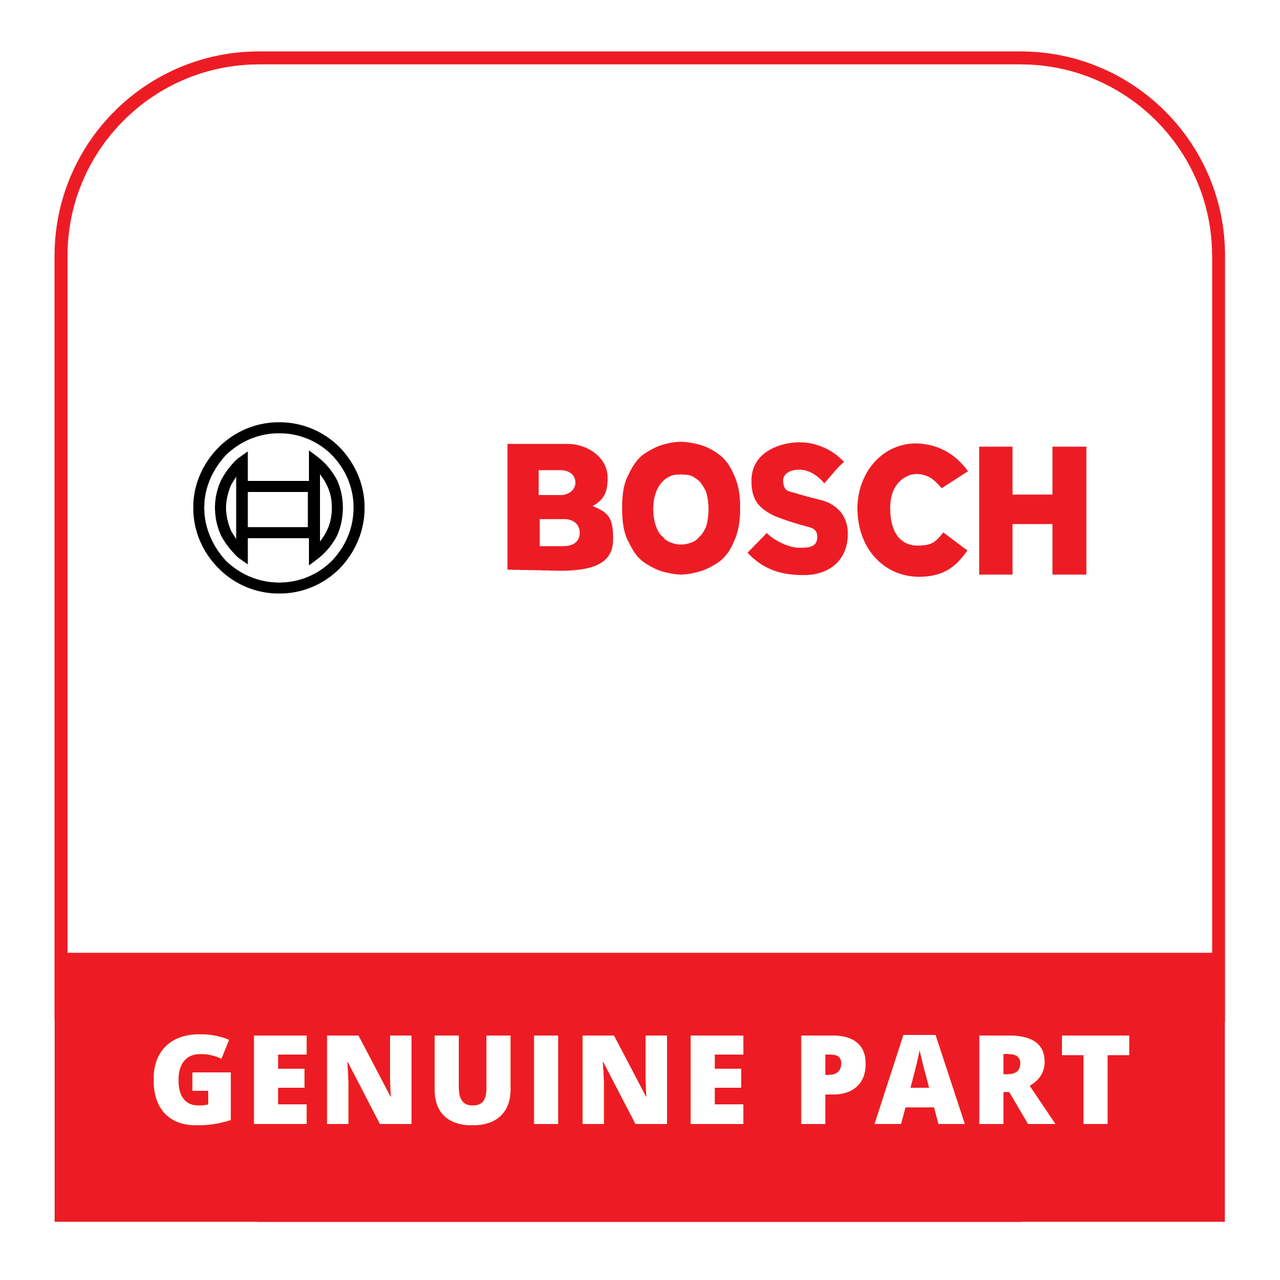 Bosch (Thermador) 10016152 - Nozzle Set Natural Gas - Genuine Bosch (Thermador) Part